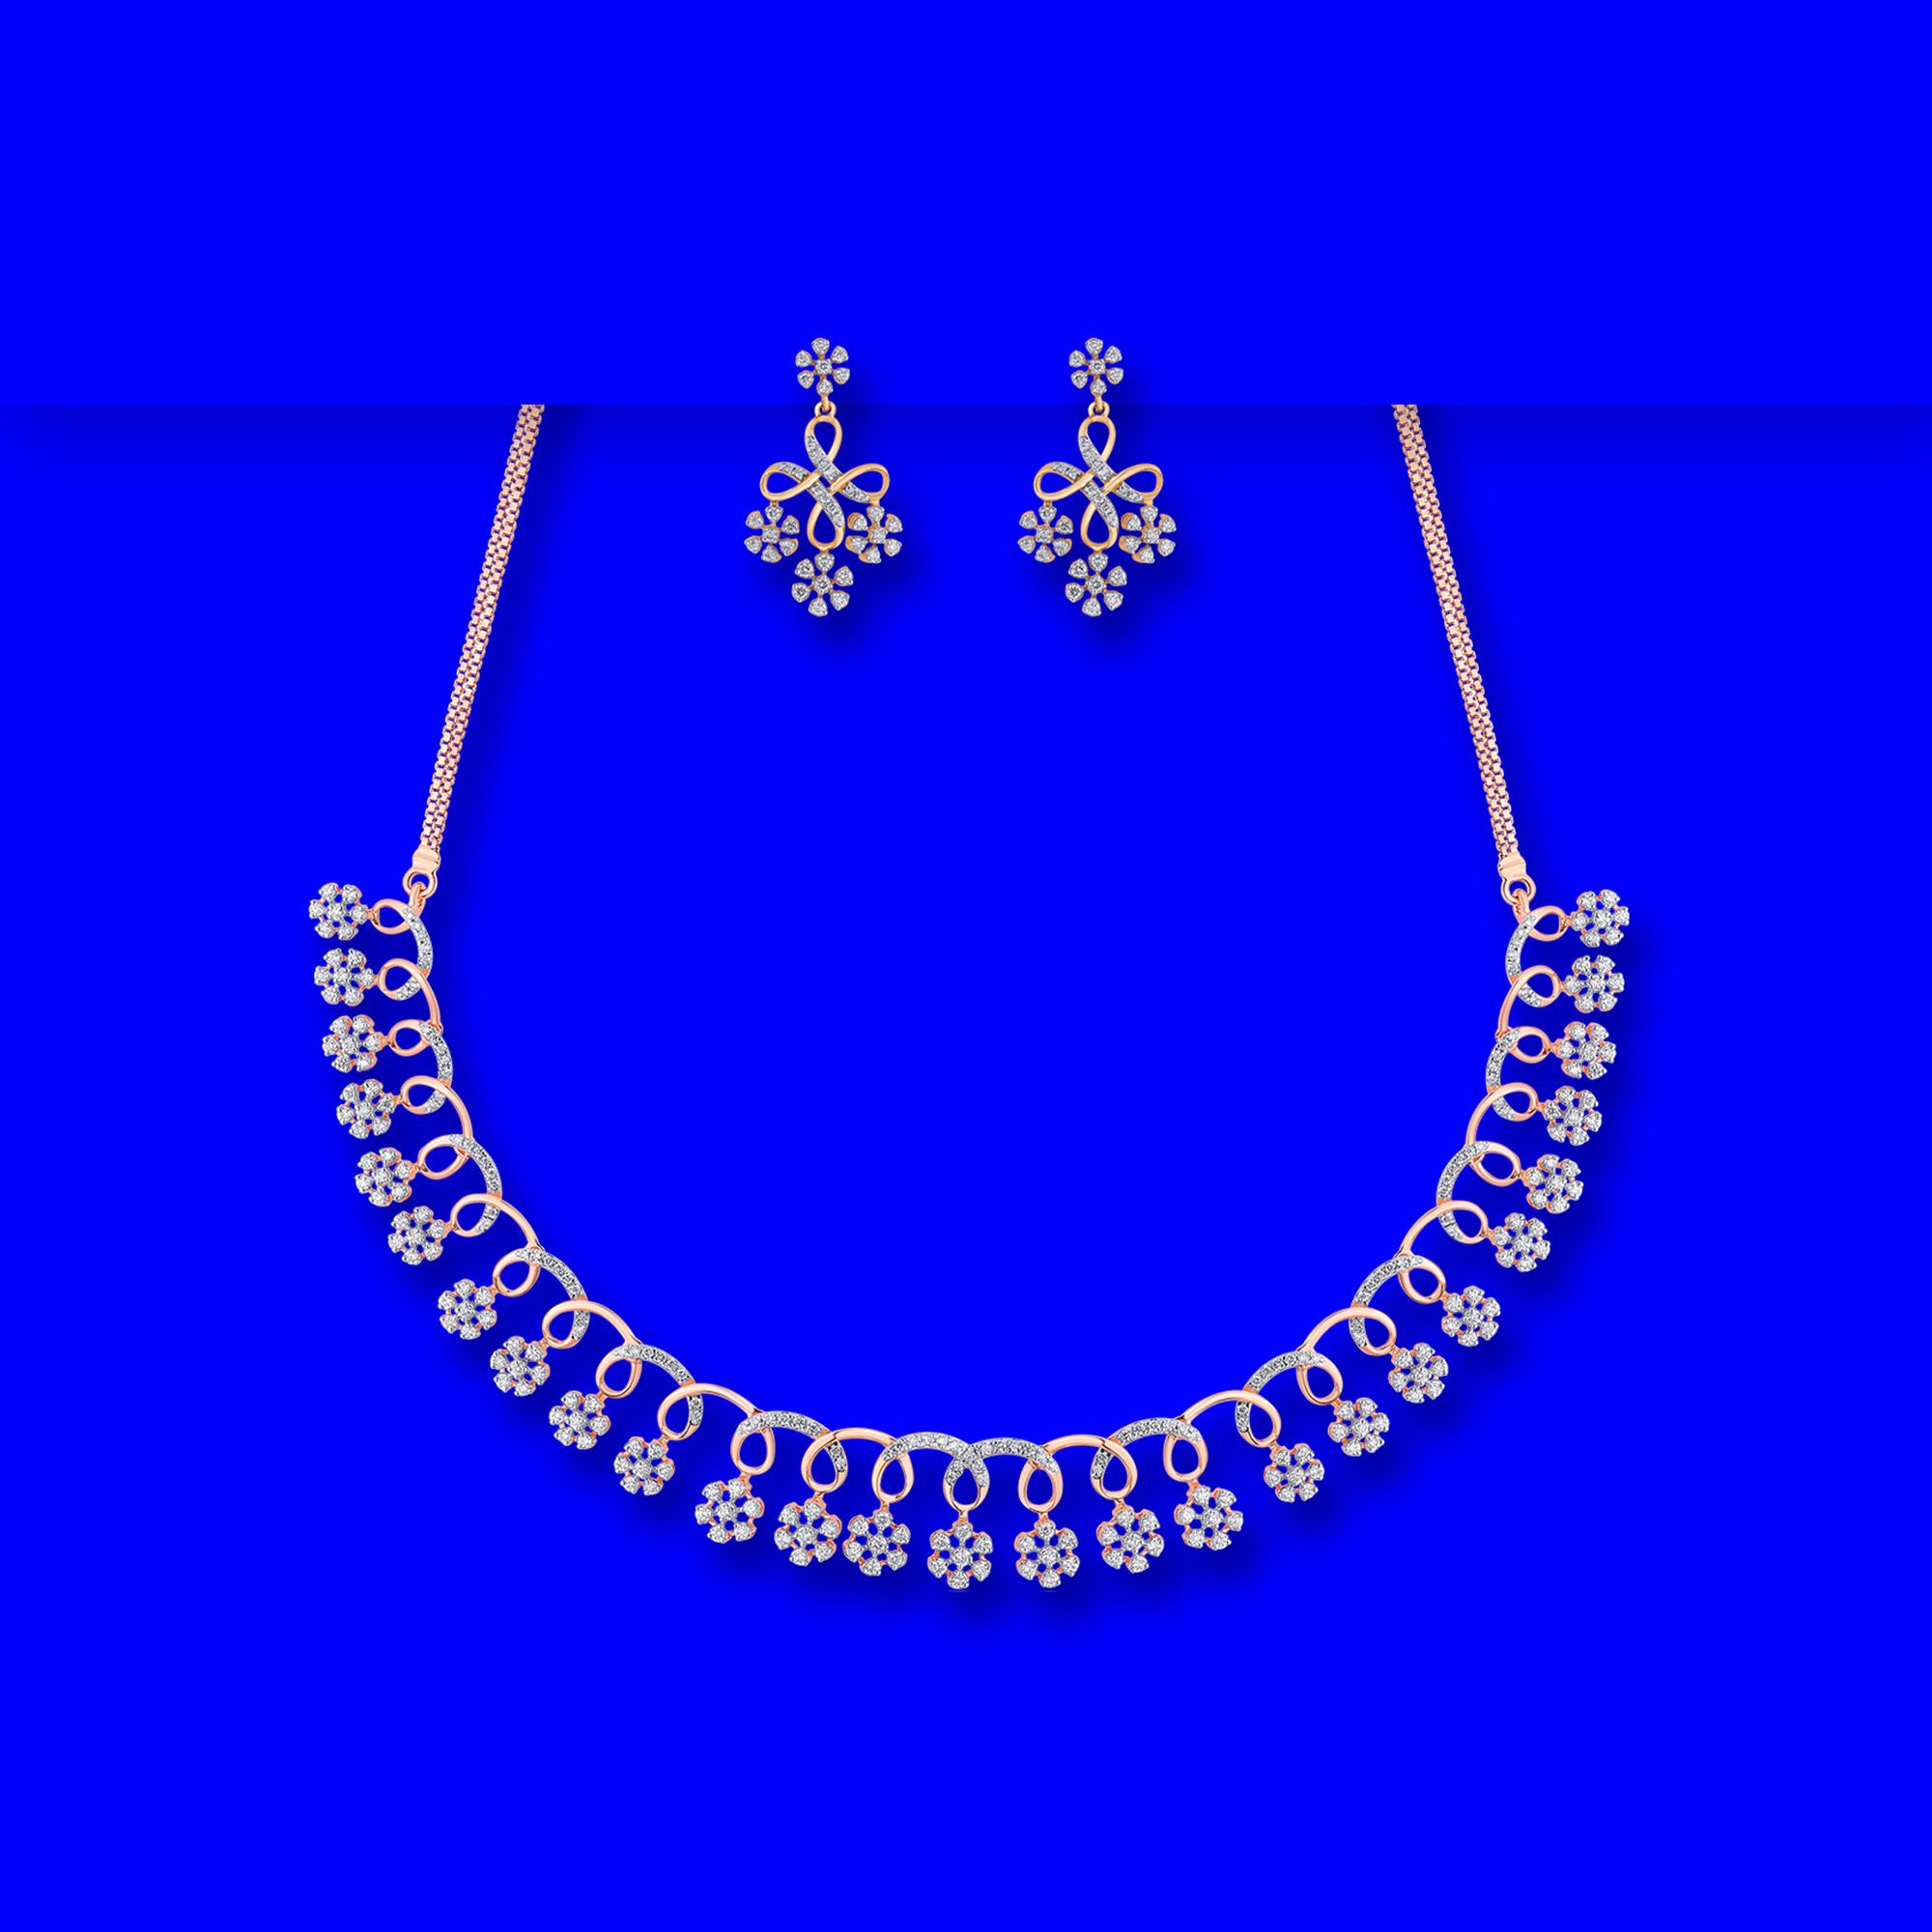 18K RG/WG Diamond Necklace and Earring Set